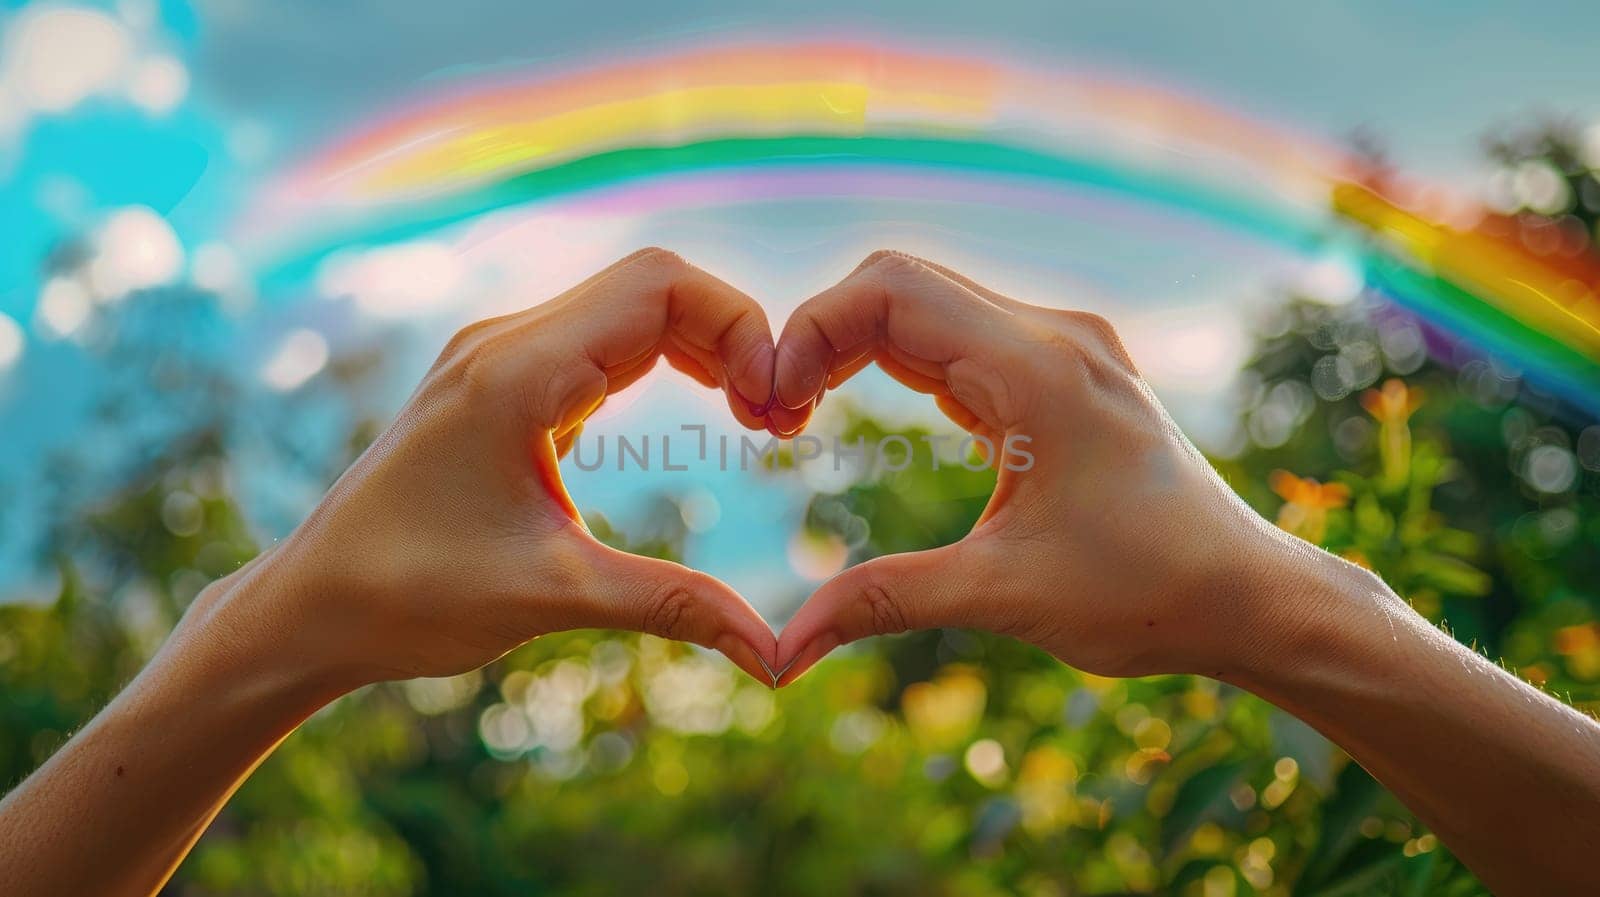 A close-up of two hands forming a heart shape, with a rainbow in the background, highlighting the themes of pride and love.